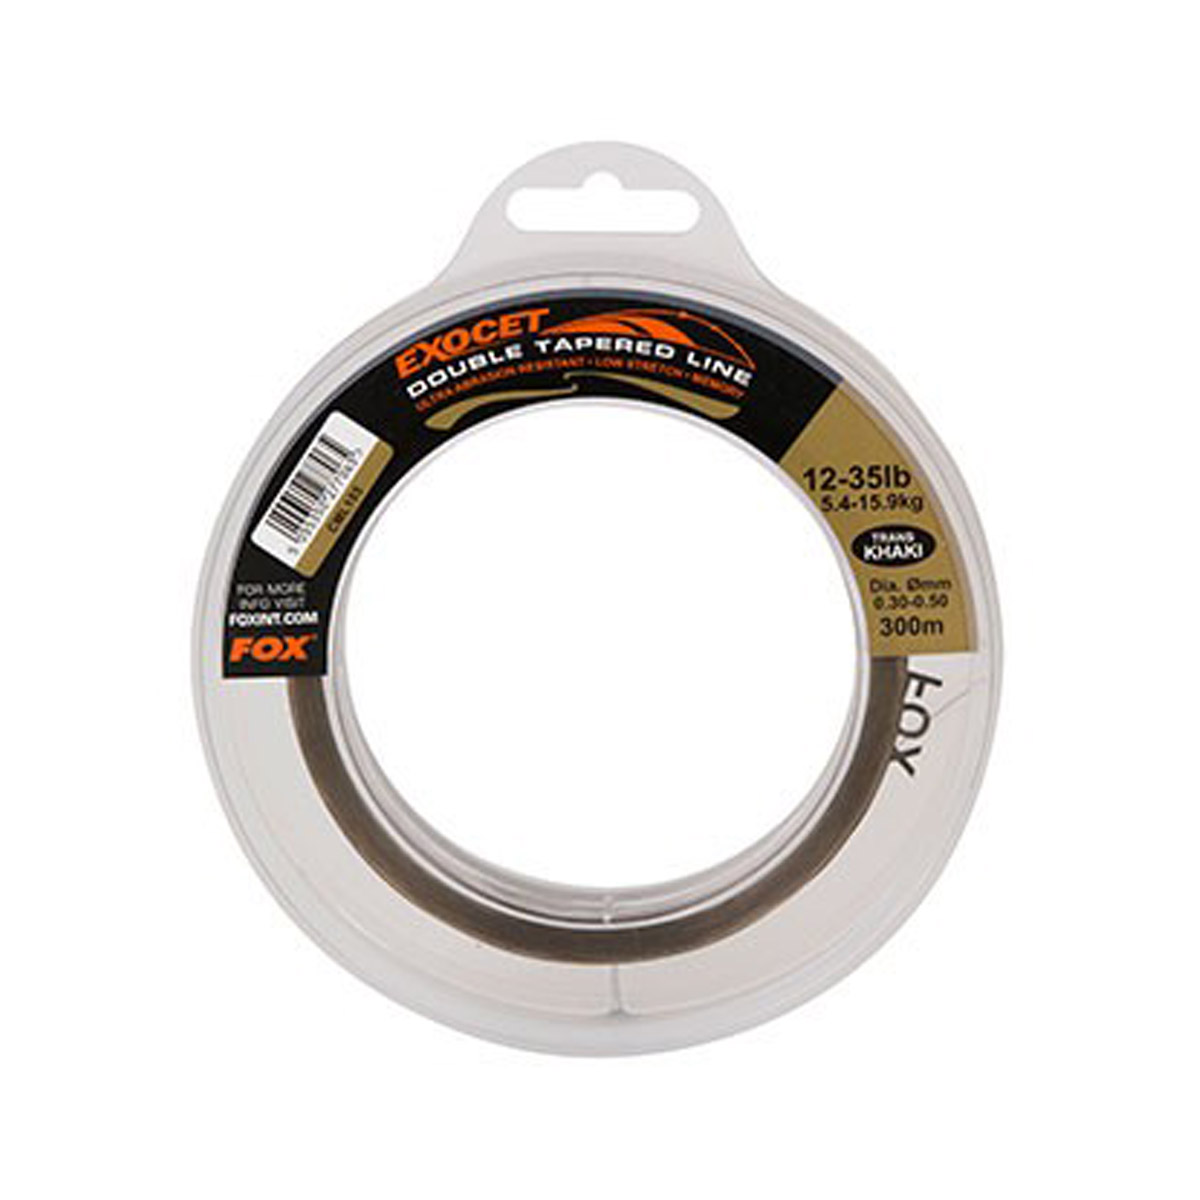 Fox Exocet Double Tapered Line -  0.30 mm